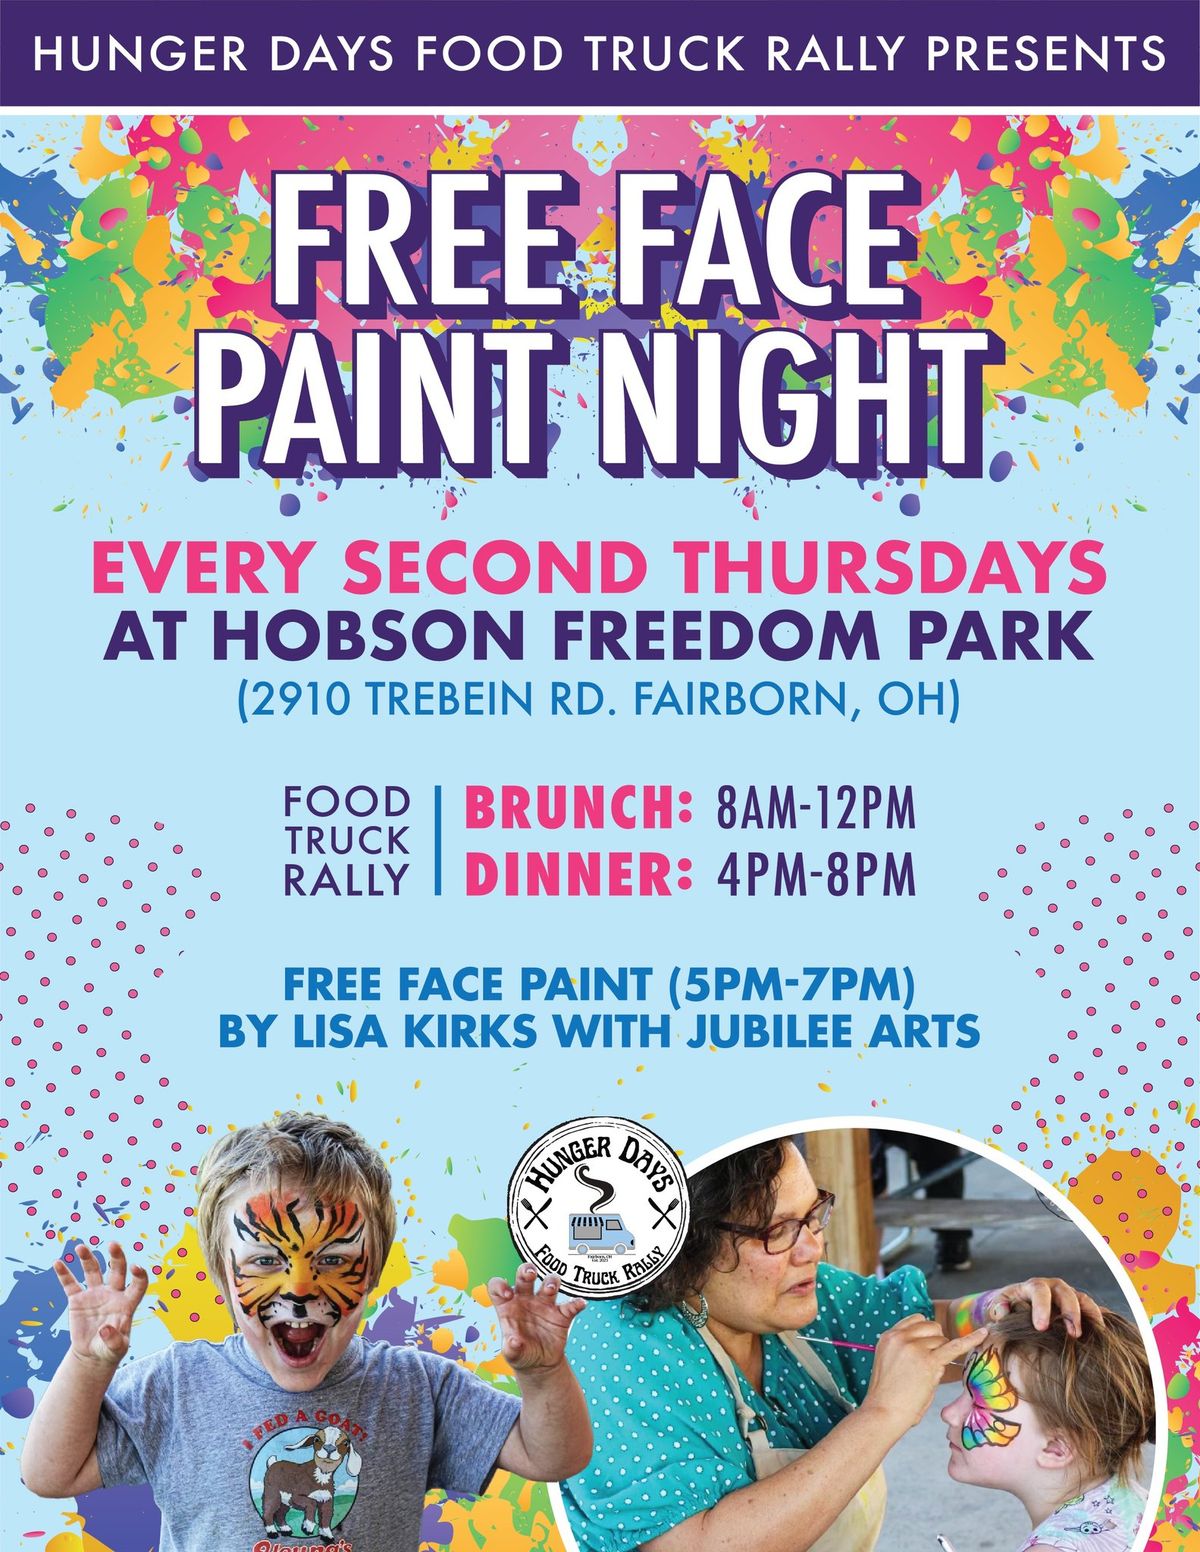 Hunger Days Food Truck Rally: Free Face Paint Night 